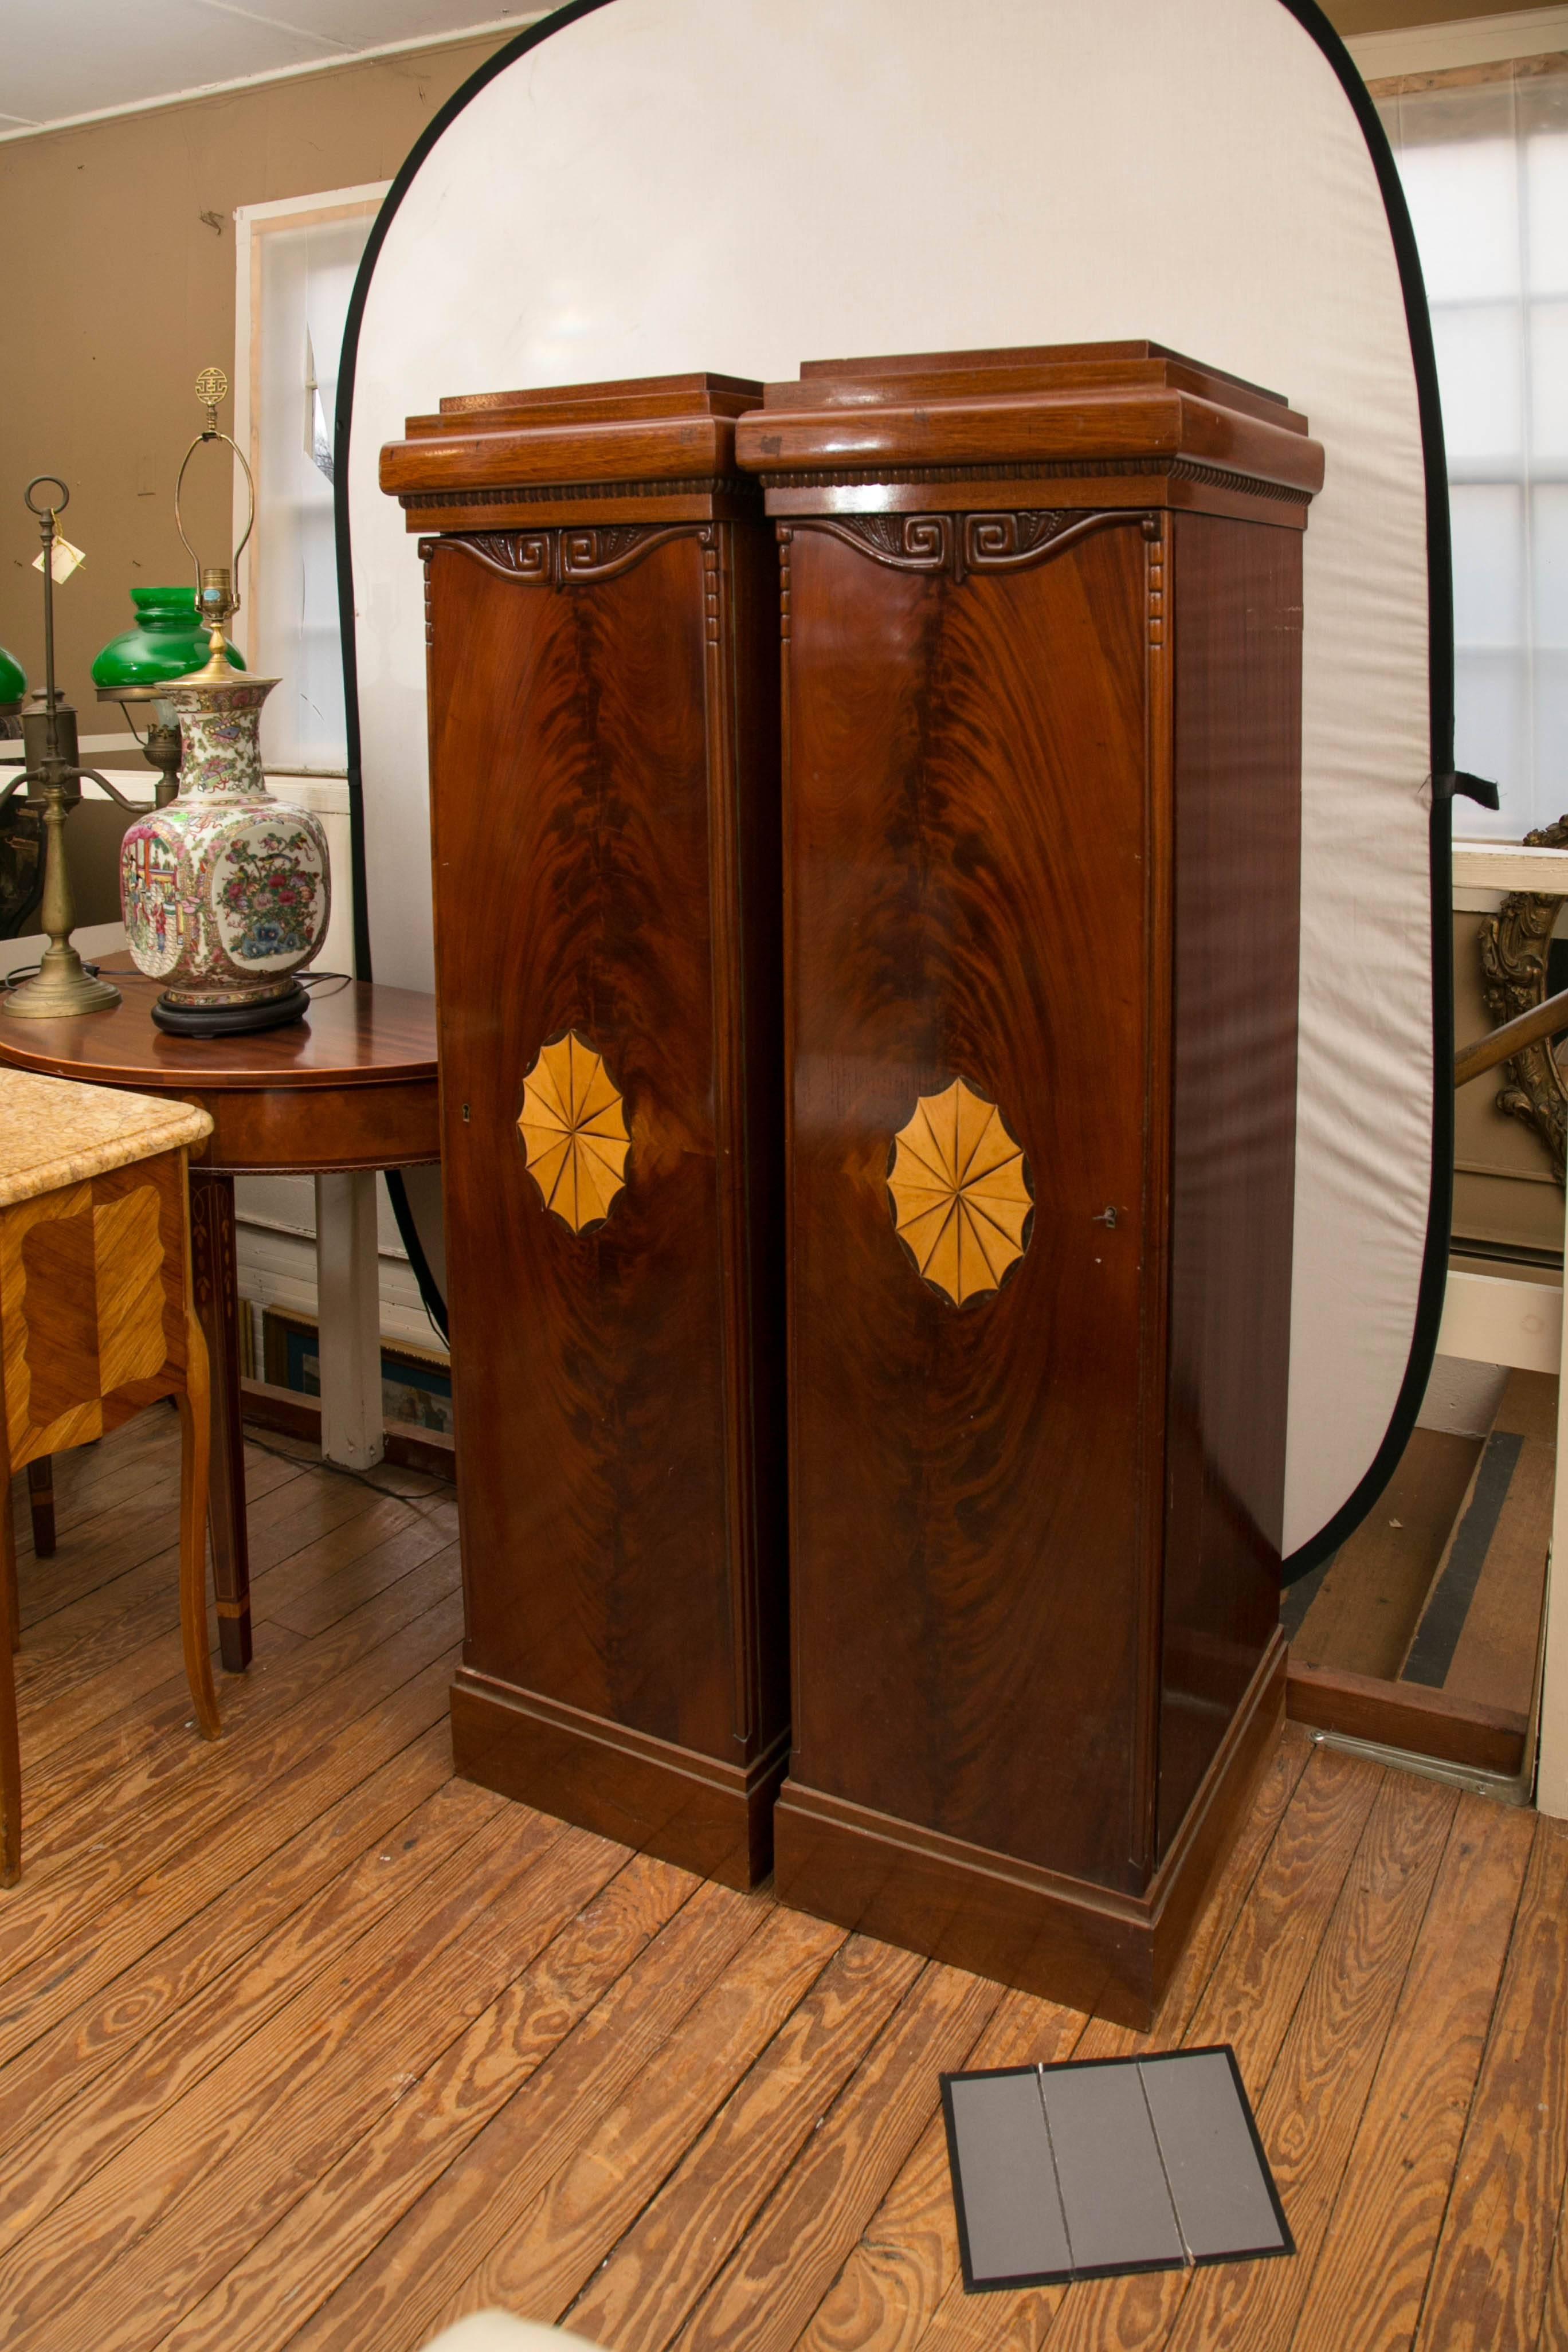 Each mahogany pedestal with a cabinet door, decorated with an inlay oval oof satinwood, hand carving and a veneer of flame mahogany. Inside are four removable shelves, each measuring 15 .75 deep amd 12 wide. 
The tops are stepped and there is a